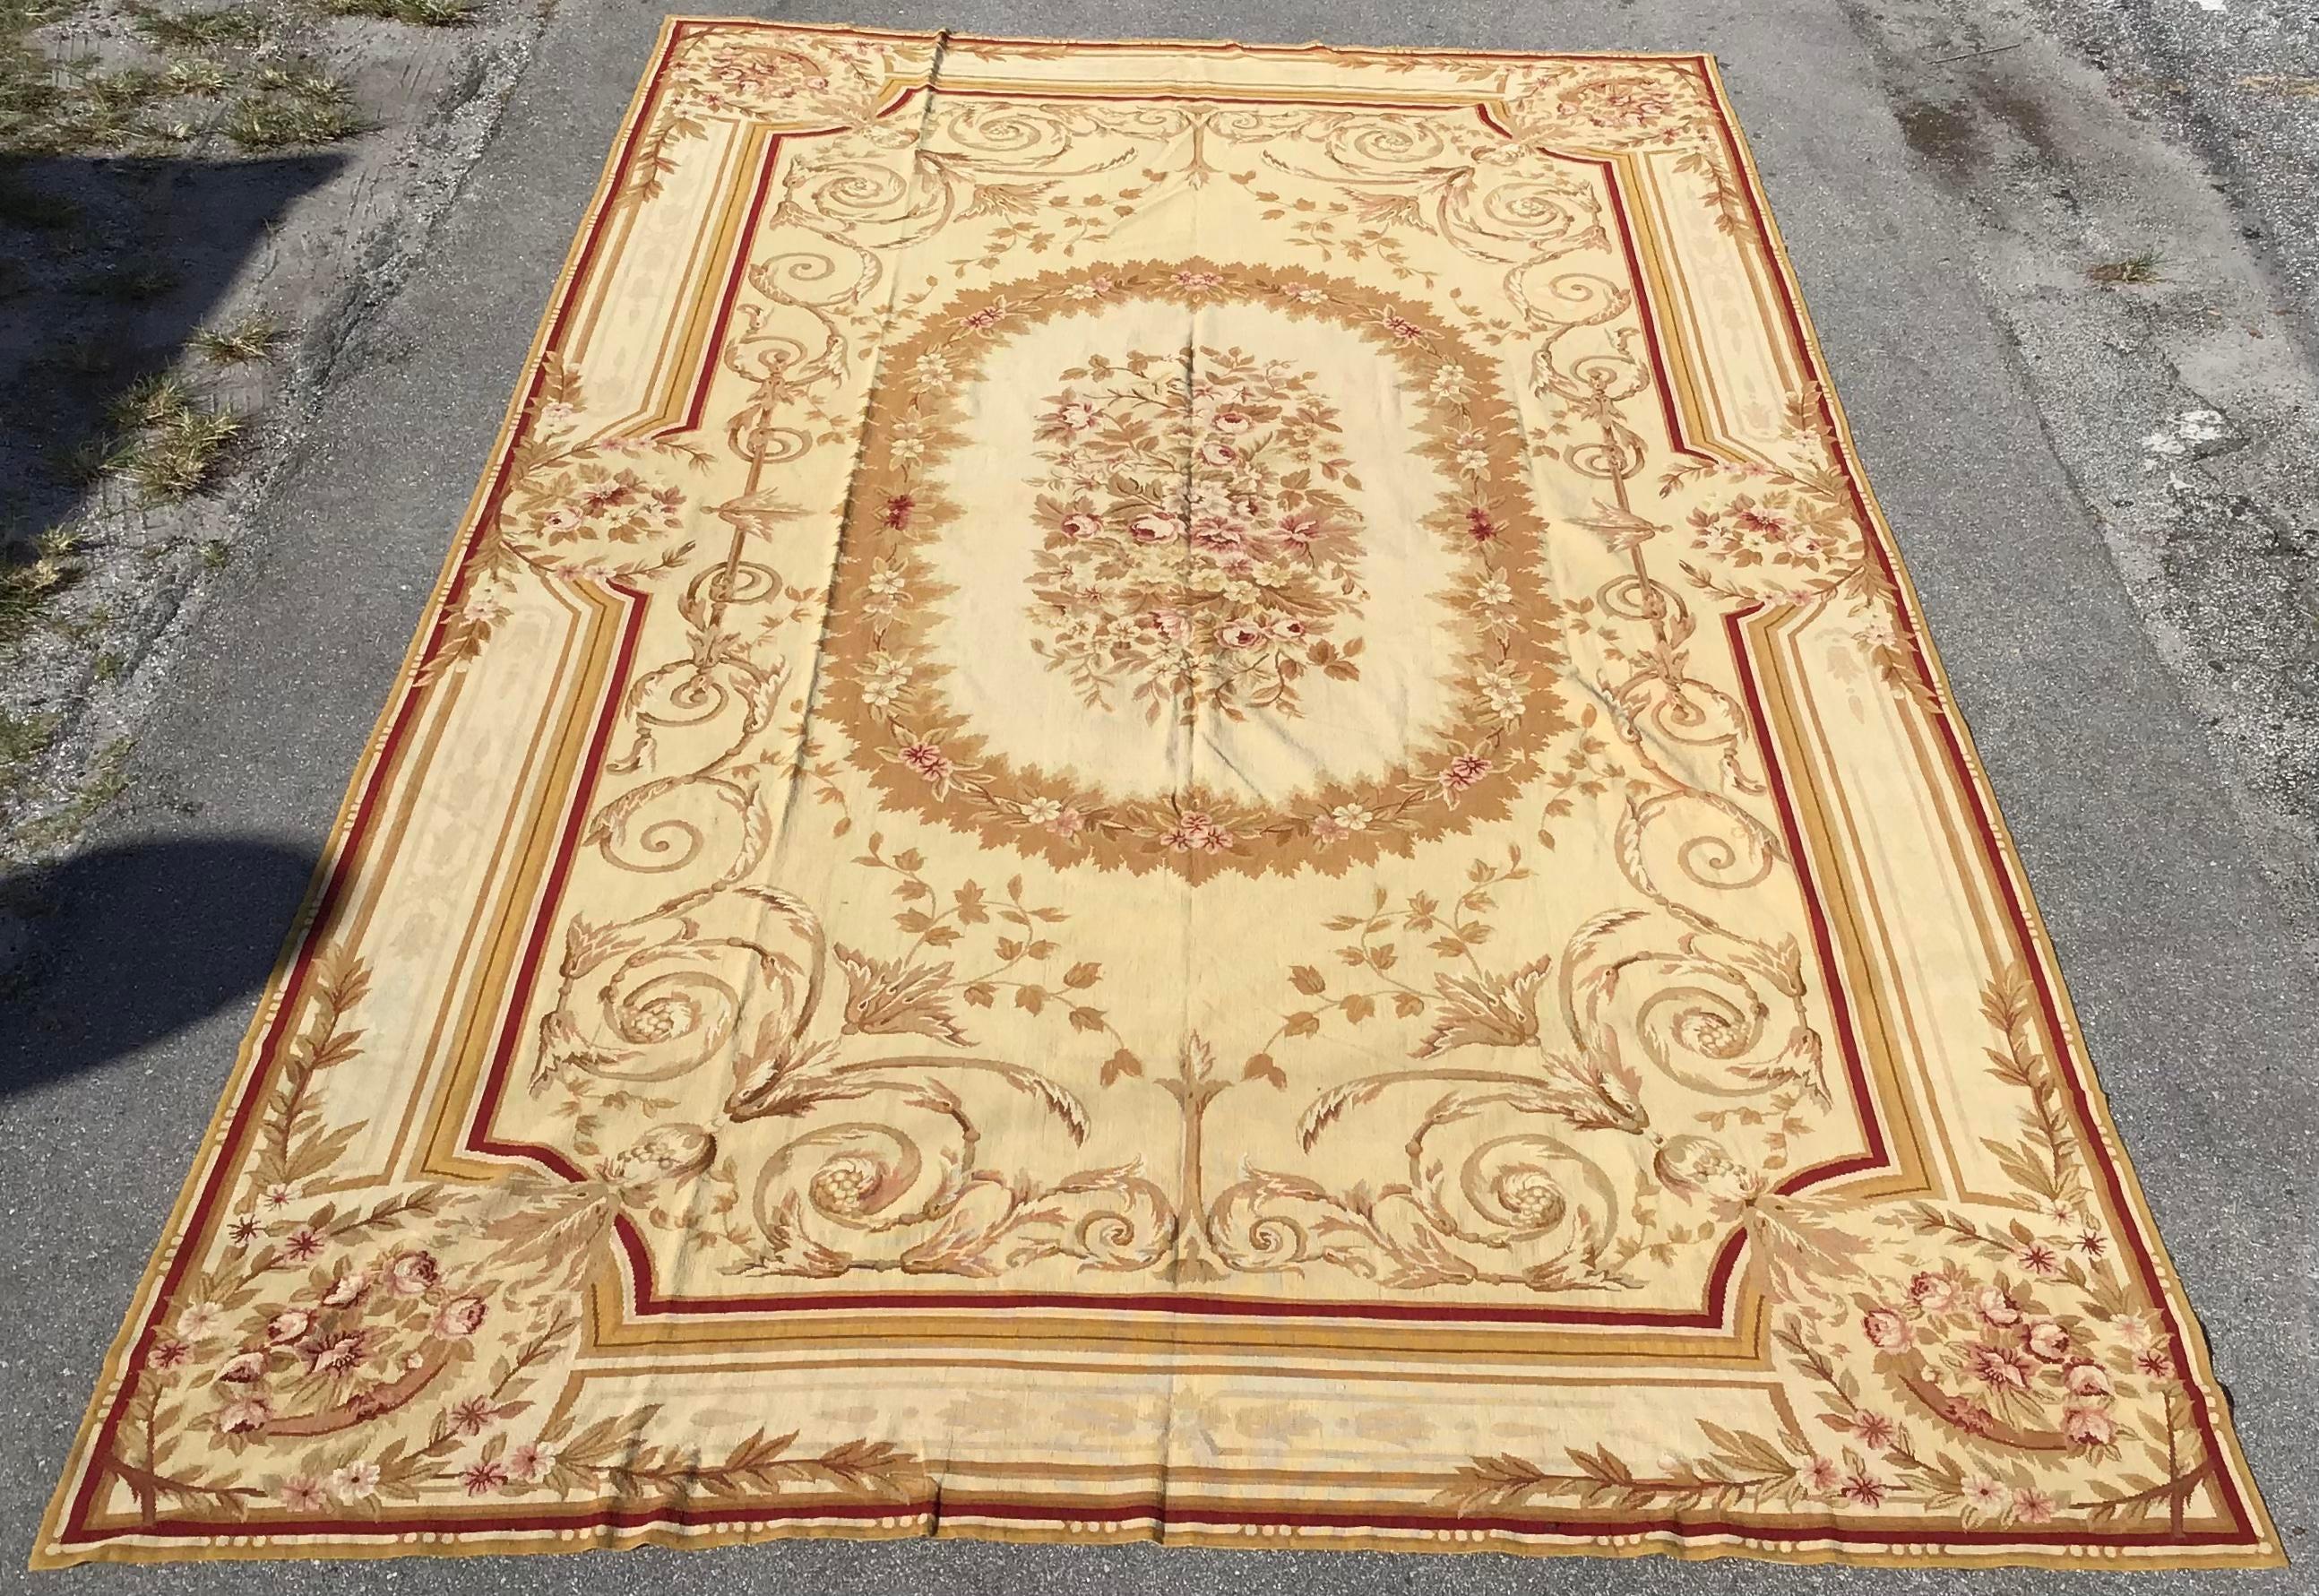 Gorgeous French Aubusson Needlepoint large carpet in the style of the iconic French designer Henri Samuel. Add some real glamour to your residence withe this very well made French Aubusson.